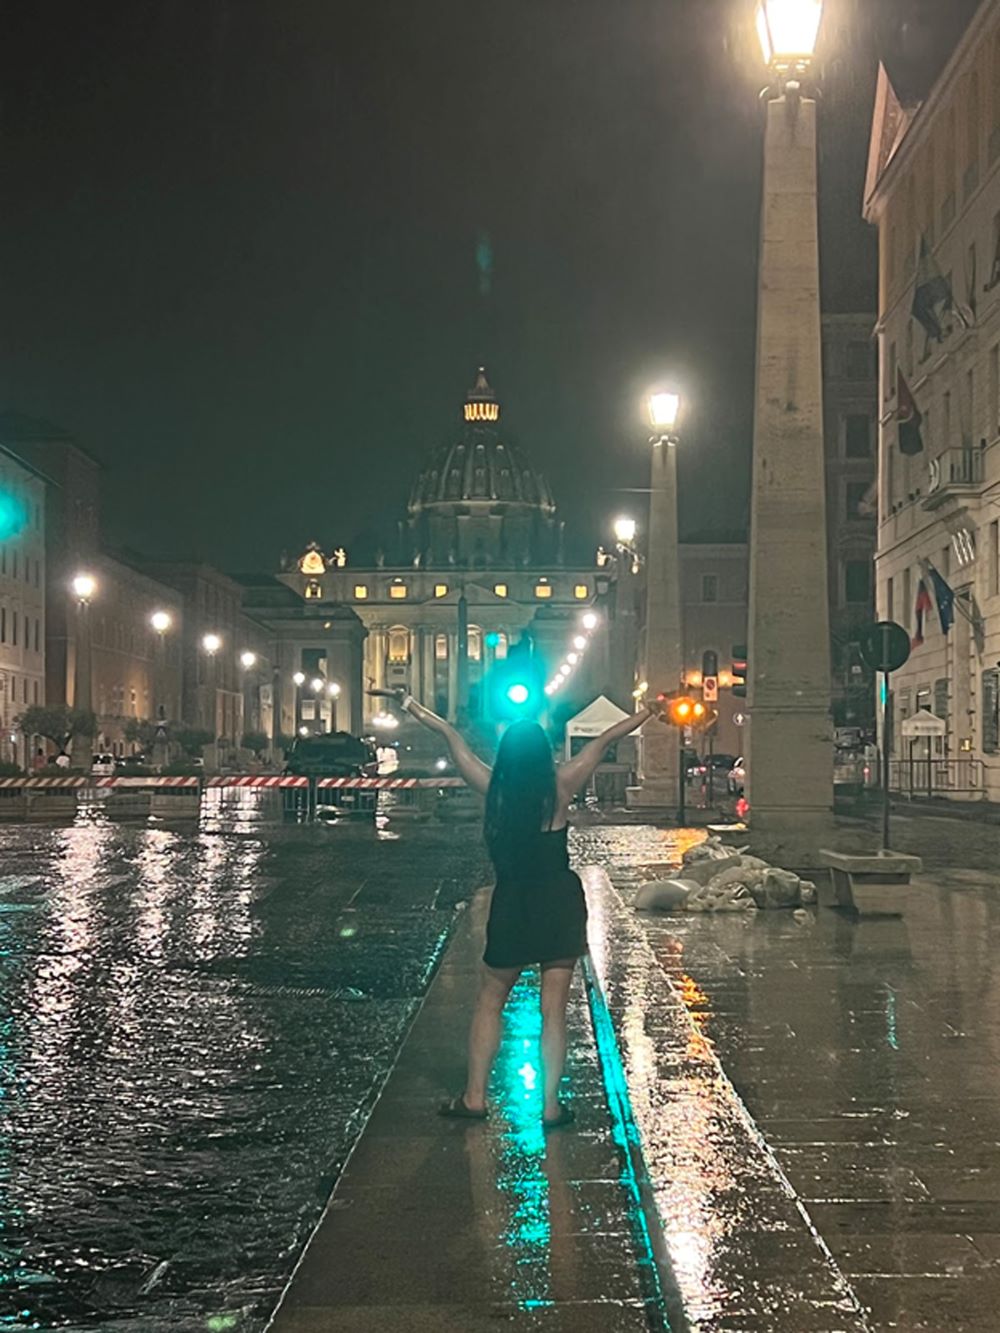 Malory Curtis, a rainy evening in front of St. Peter's Basillica, the Vatican.